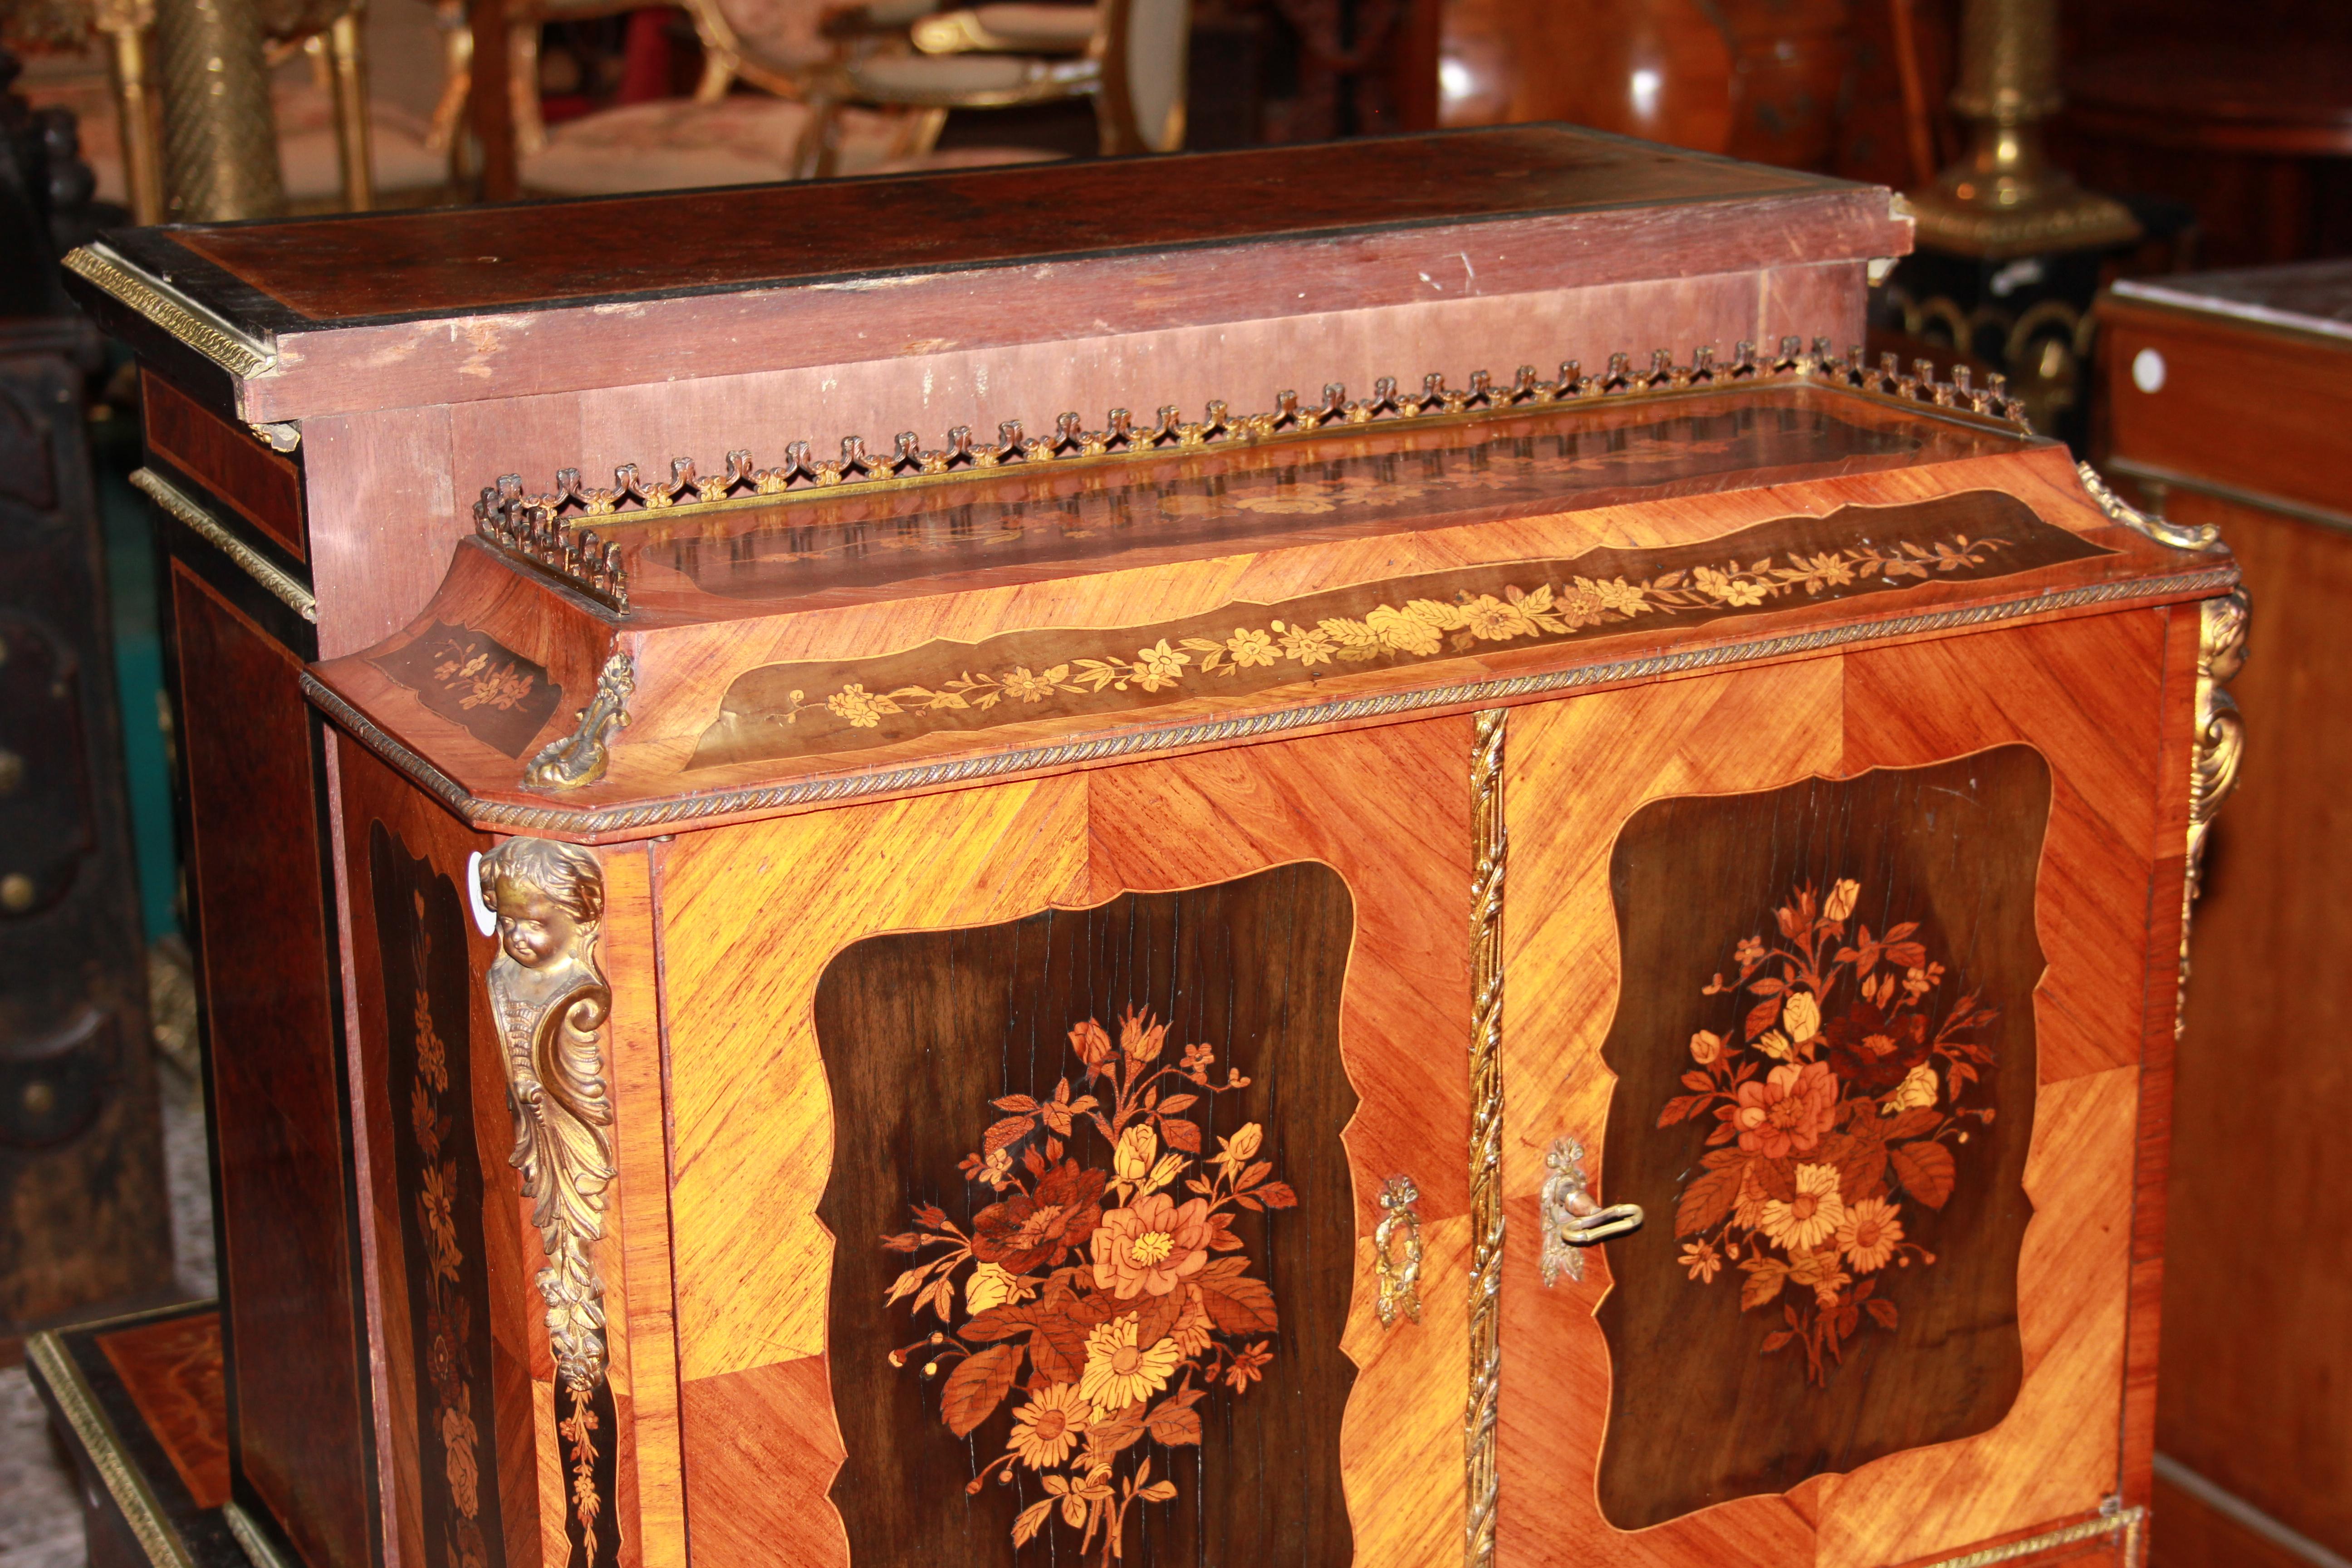 French credenza cabinet from the first half of the 1800s, Louis XV style, made of rosewood and ebony richly inlaid. It features an upper body with a top perimeter bordered by brass railing, 2 closed doors, and bronze caryatids. The lower body